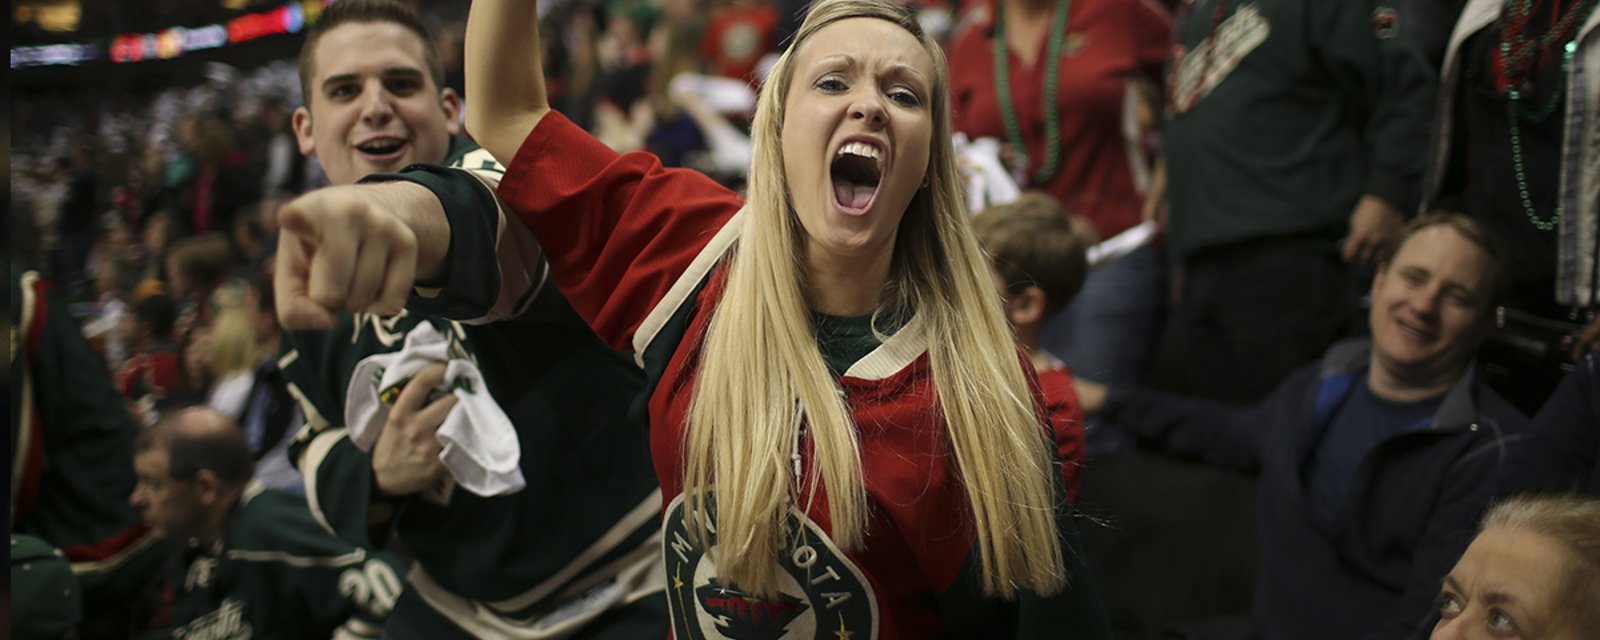 Five things every Wild fan needs for the playoffs!